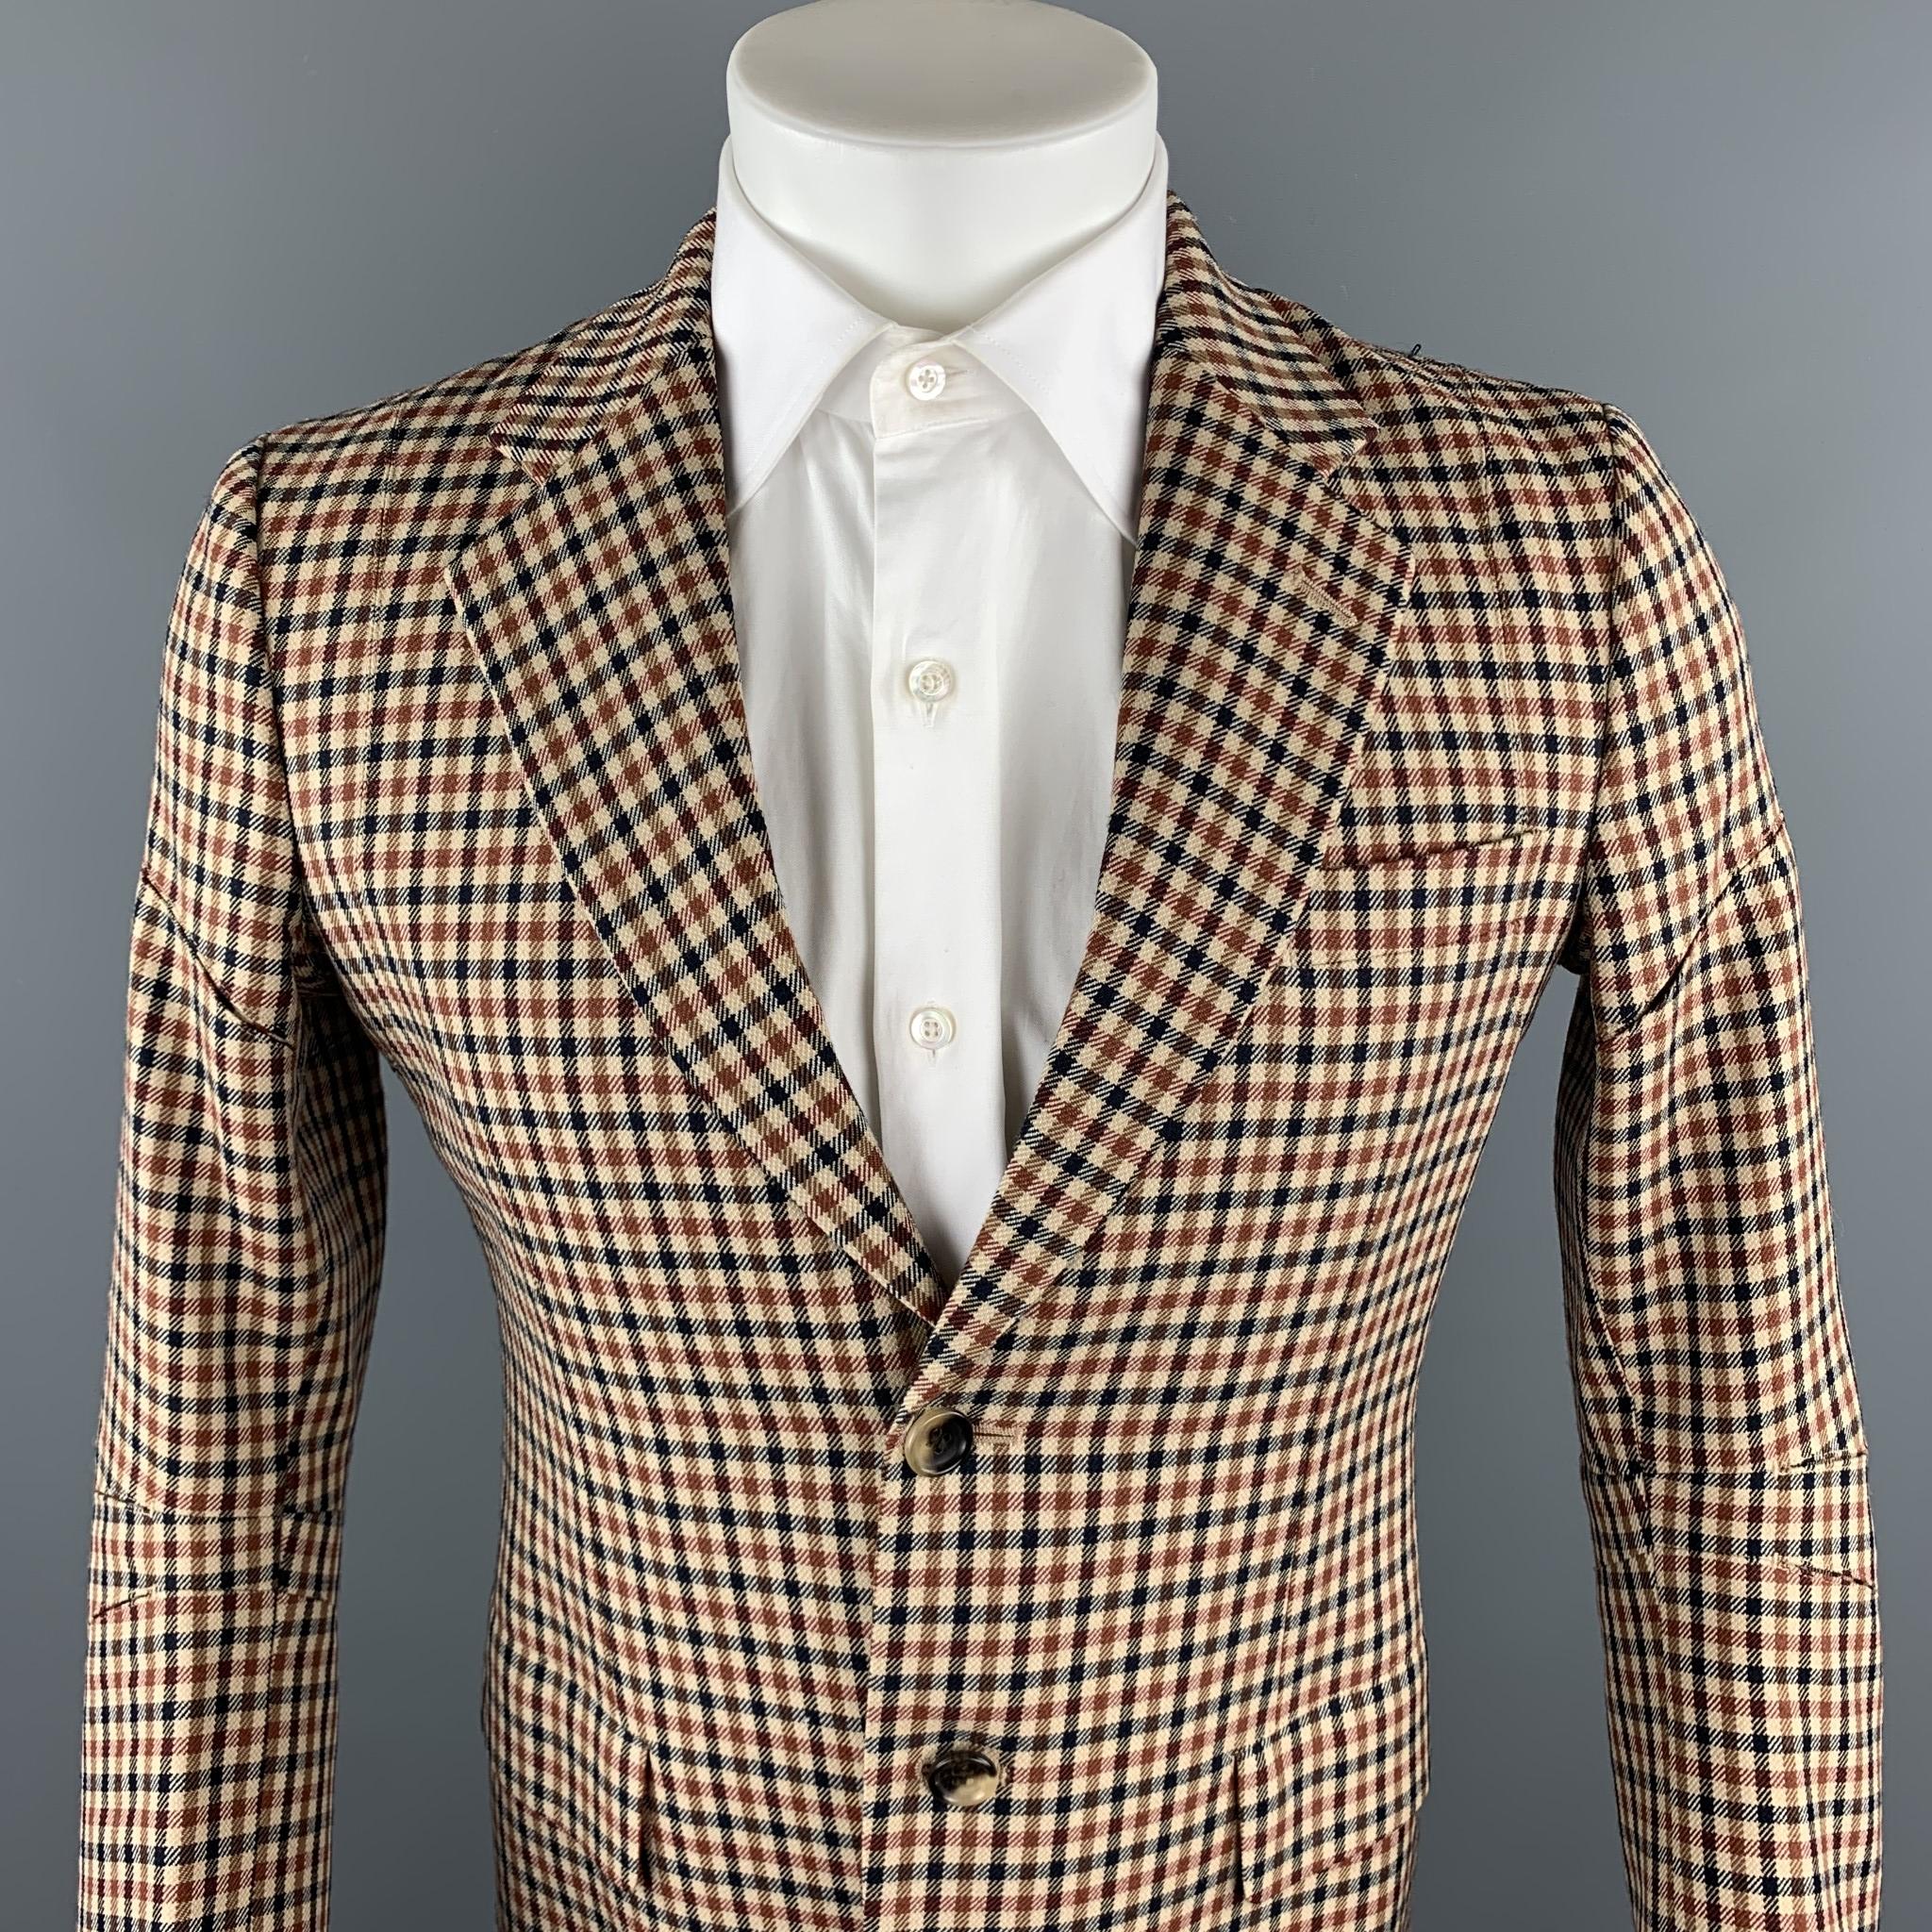 JUNYA WATANABE sport coat comes in a tan plaid wool with a half red liner featuring a notch lapel, flap pockets, cutout details, single vent, and a two button closure. Made in Japan.

Excellent Pre-Owned Condition.
Marked: JP L /